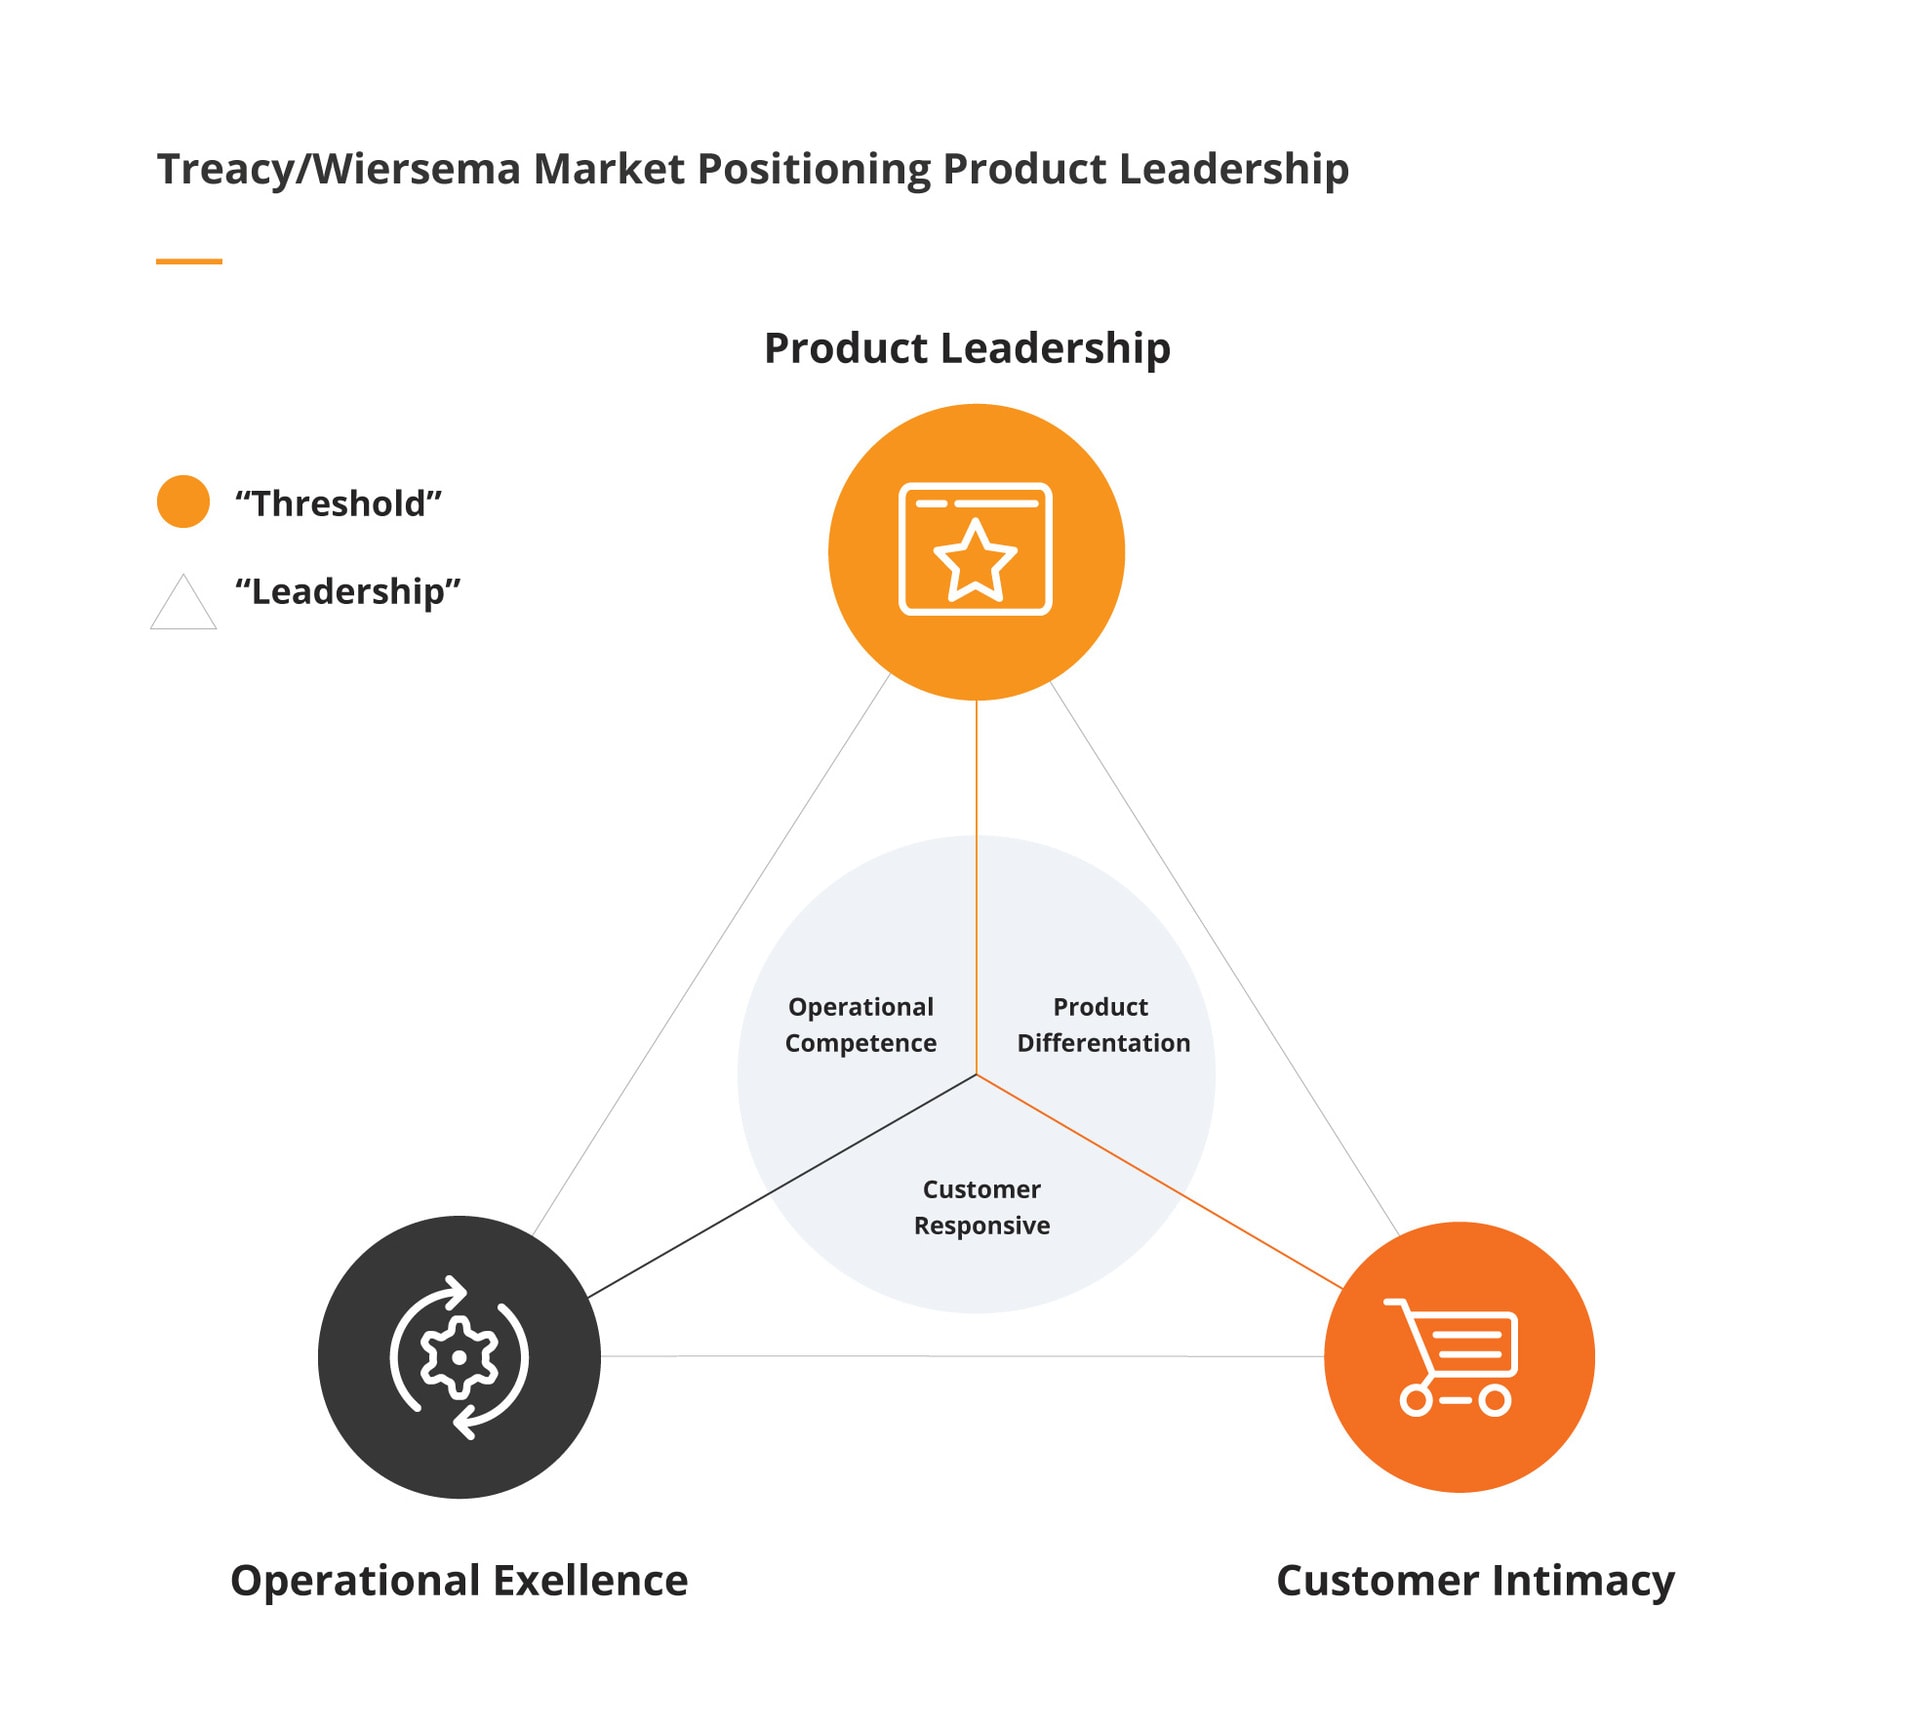 Treacy and Wiersema Market Positioning Product Leadership